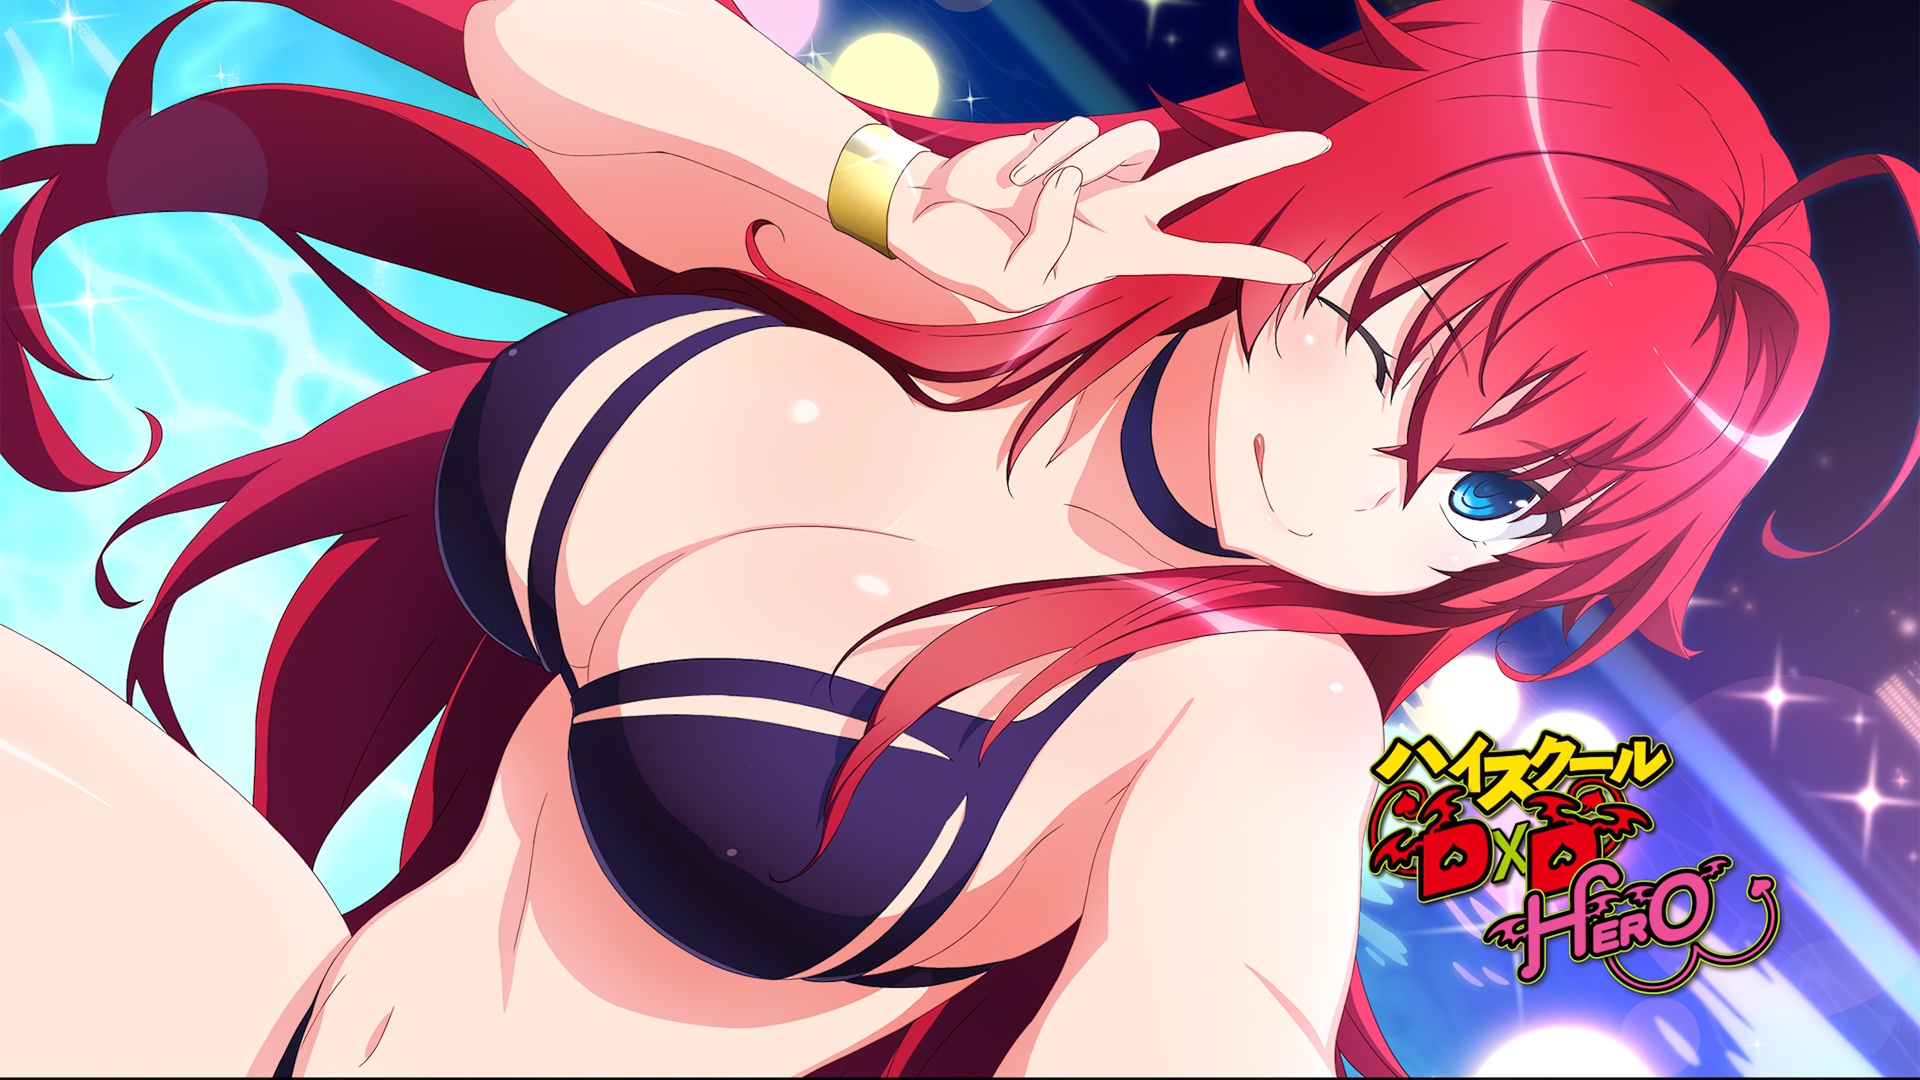 Anime 1920x1080 High School DxD Gremory Rias redhead blue eyes wink tongue out peace sign big boobs bikini purple bikini long hair belly water looking at viewer boobs women selfies cleavage one eye closed tongues hand gesture